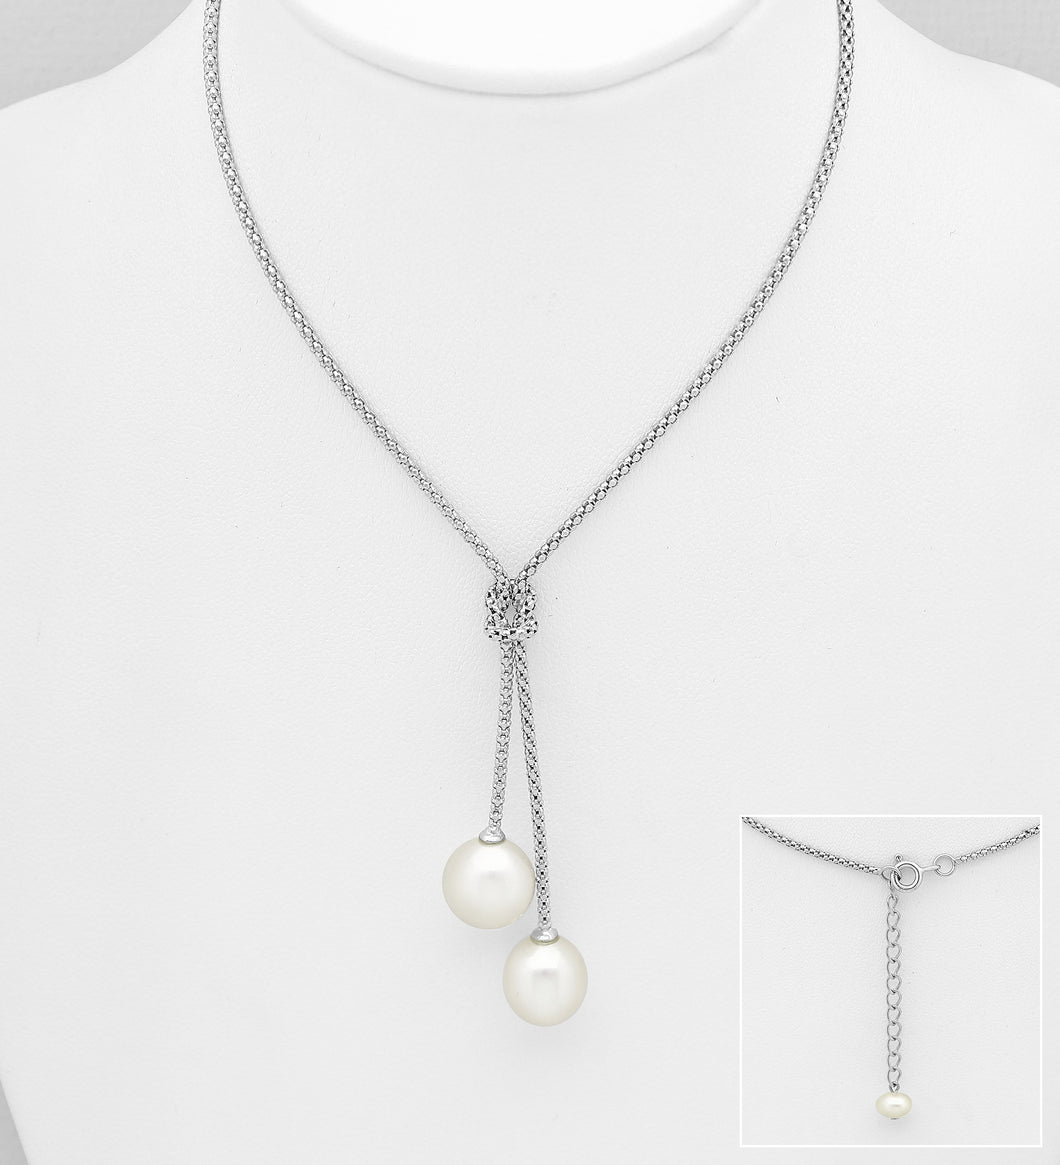 Silver Knot Necklace Decorated with Freshwater Pearl